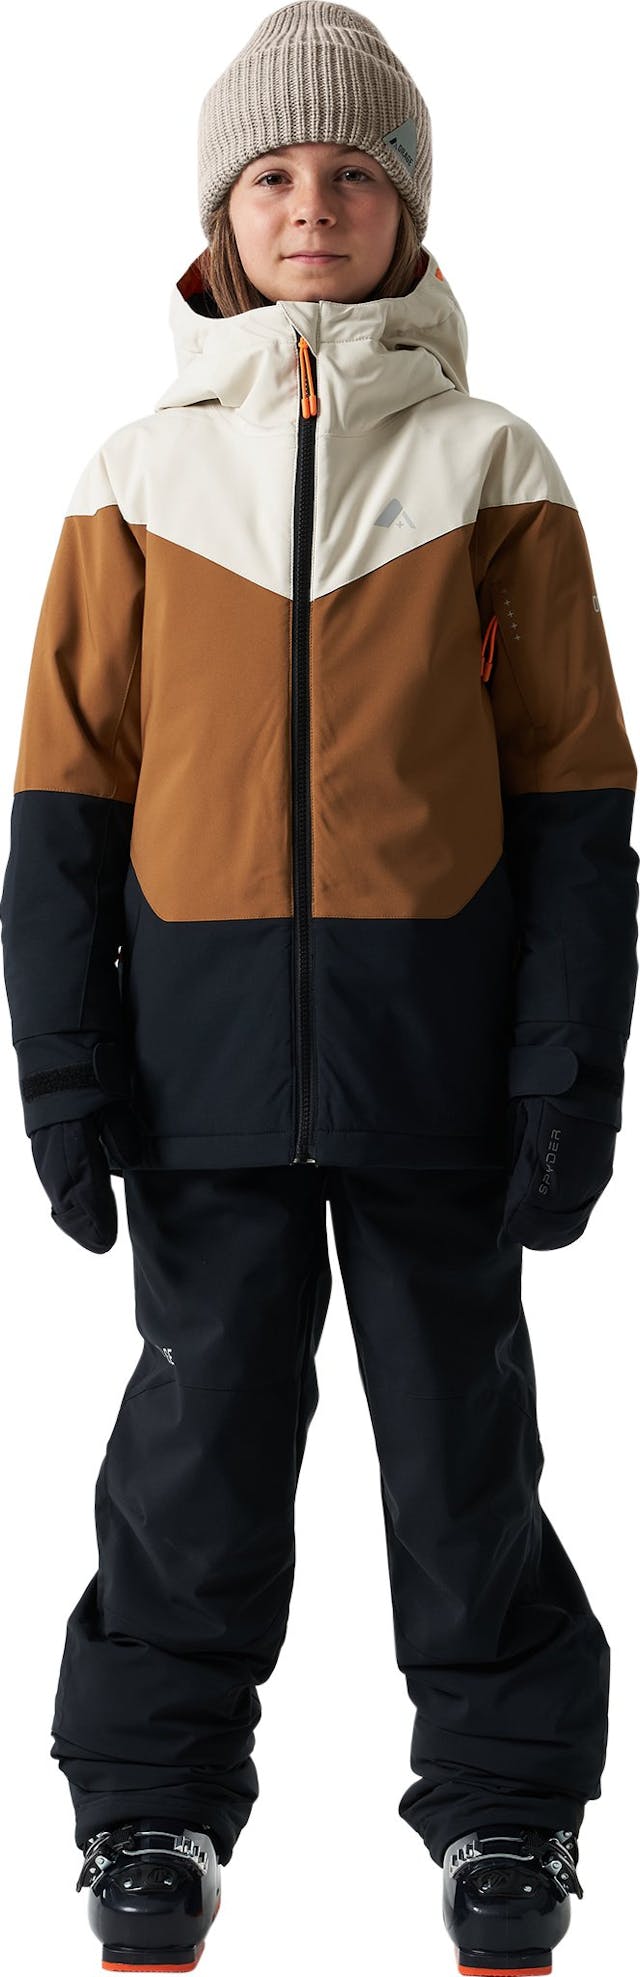 Product image for Shefford Insulated Jacket - Girls